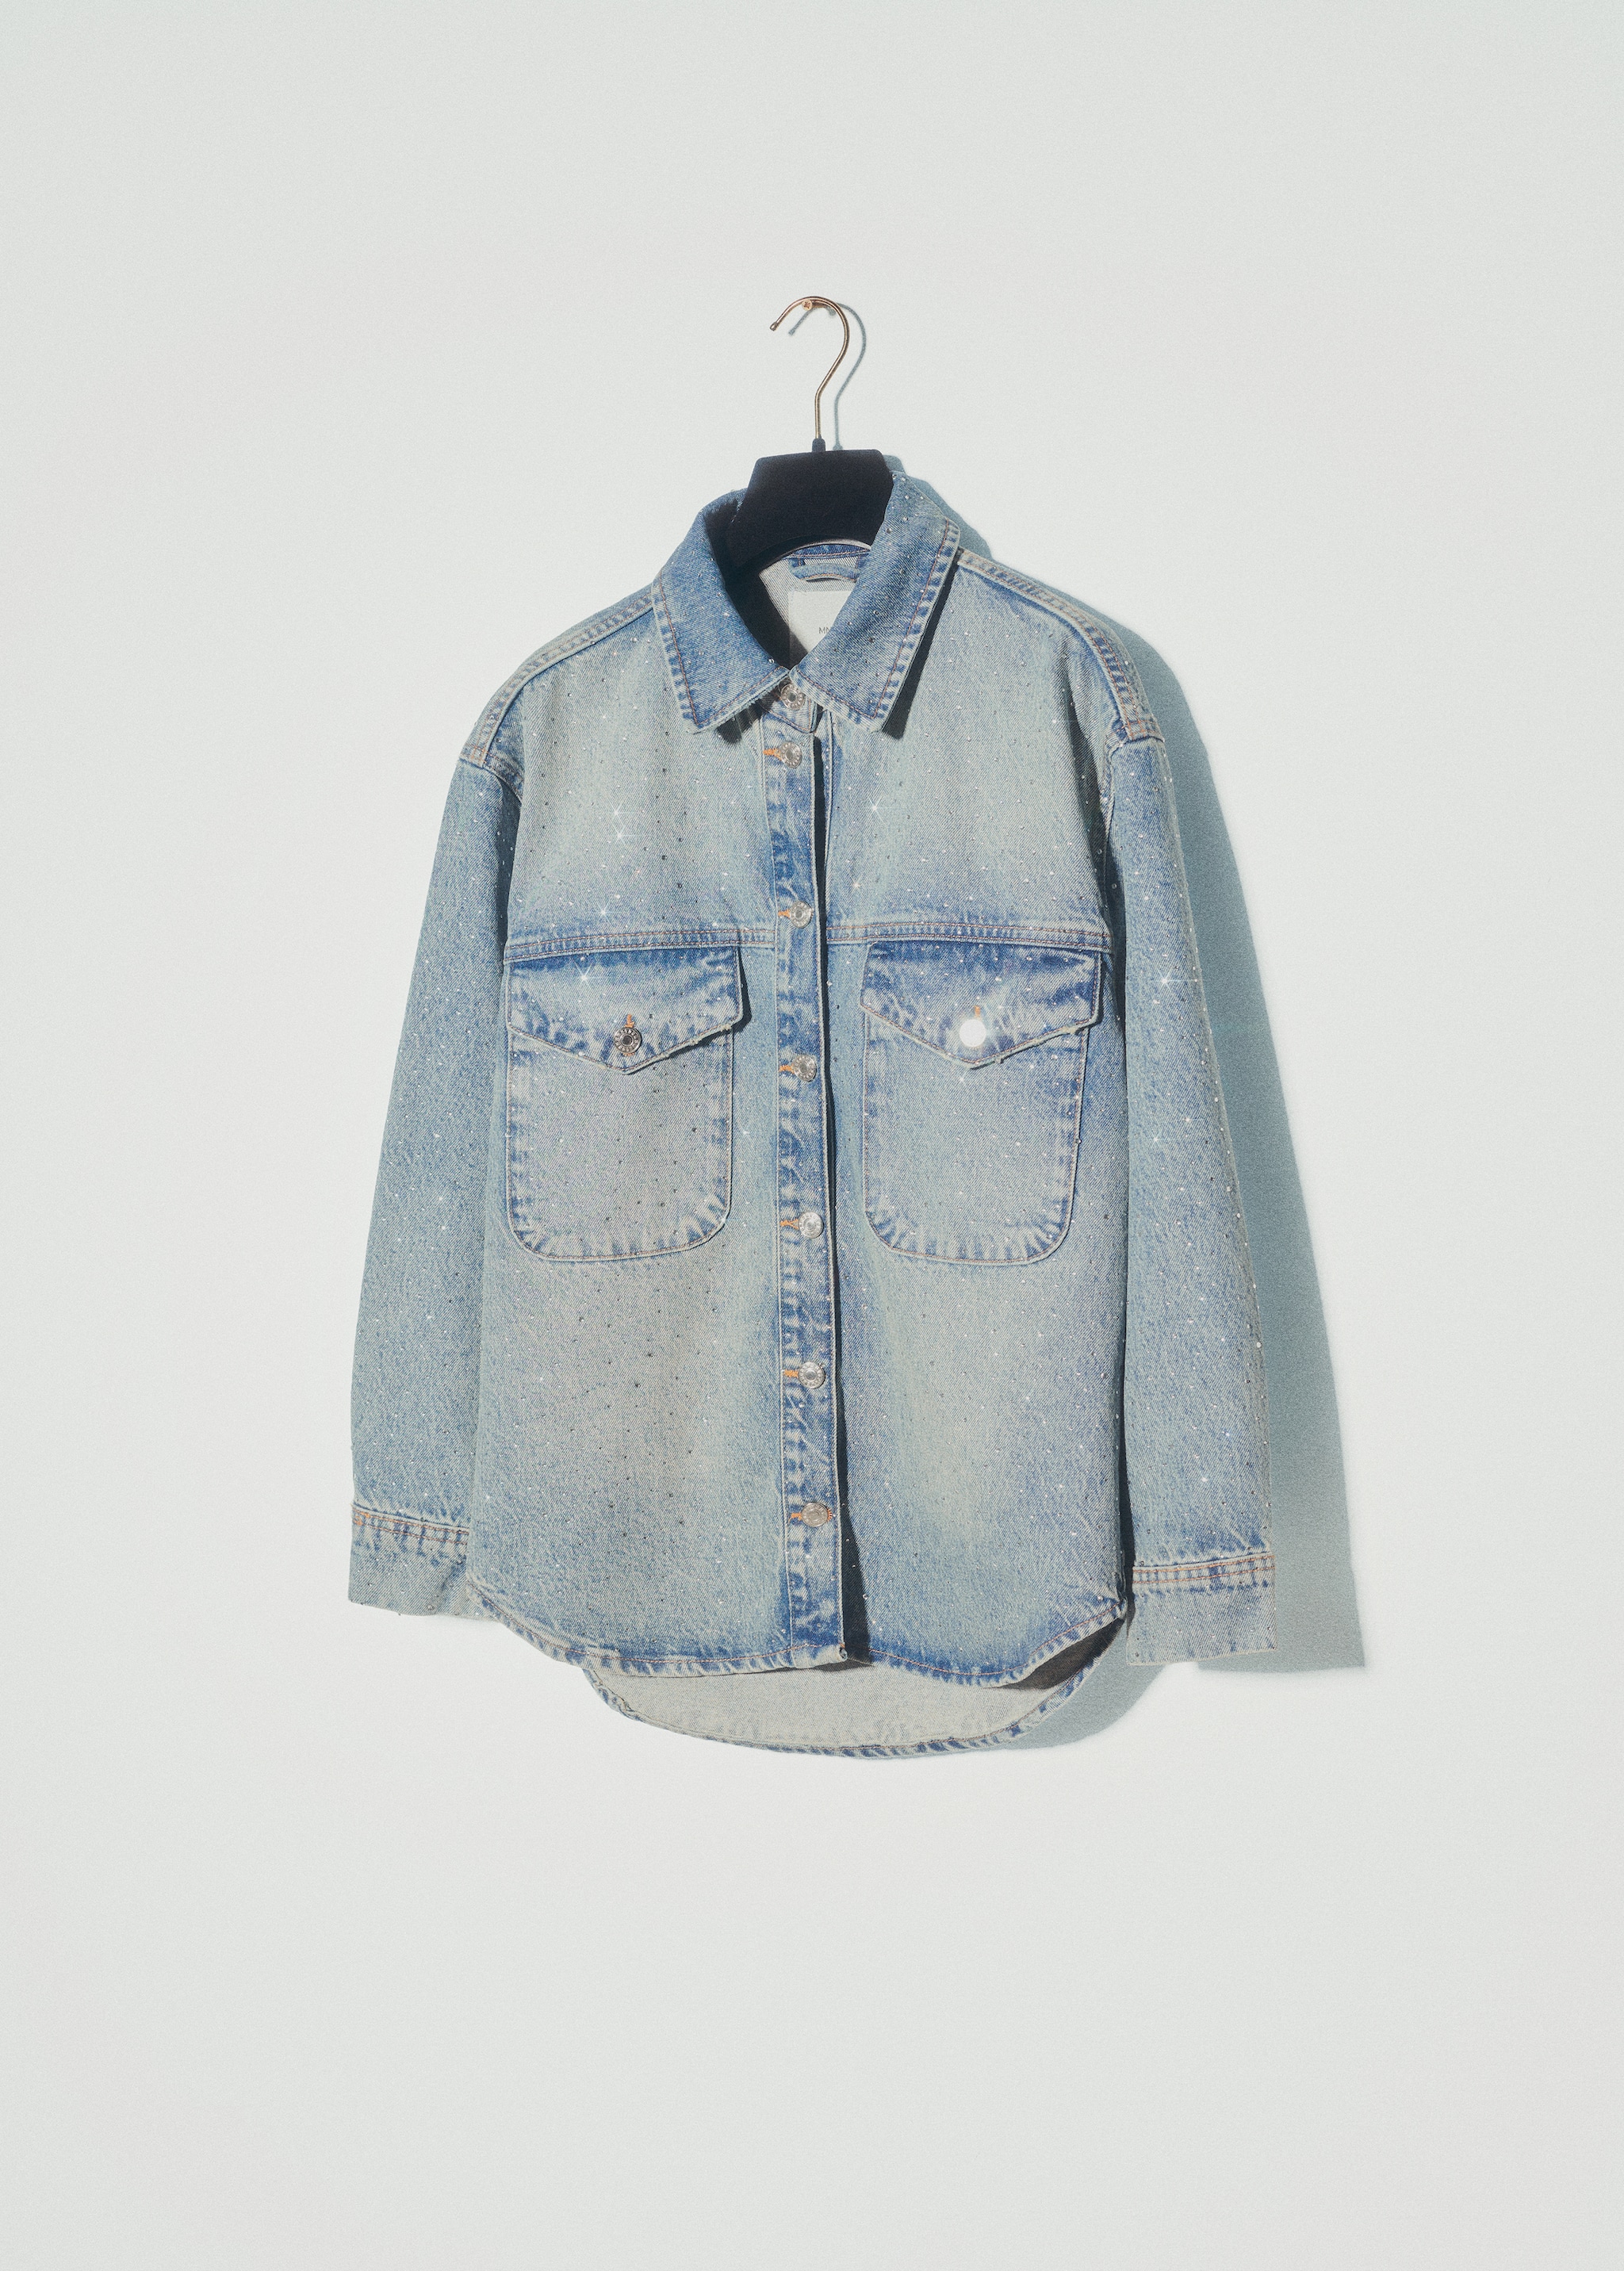 Denim jacket with rhinestones - Details of the article 3